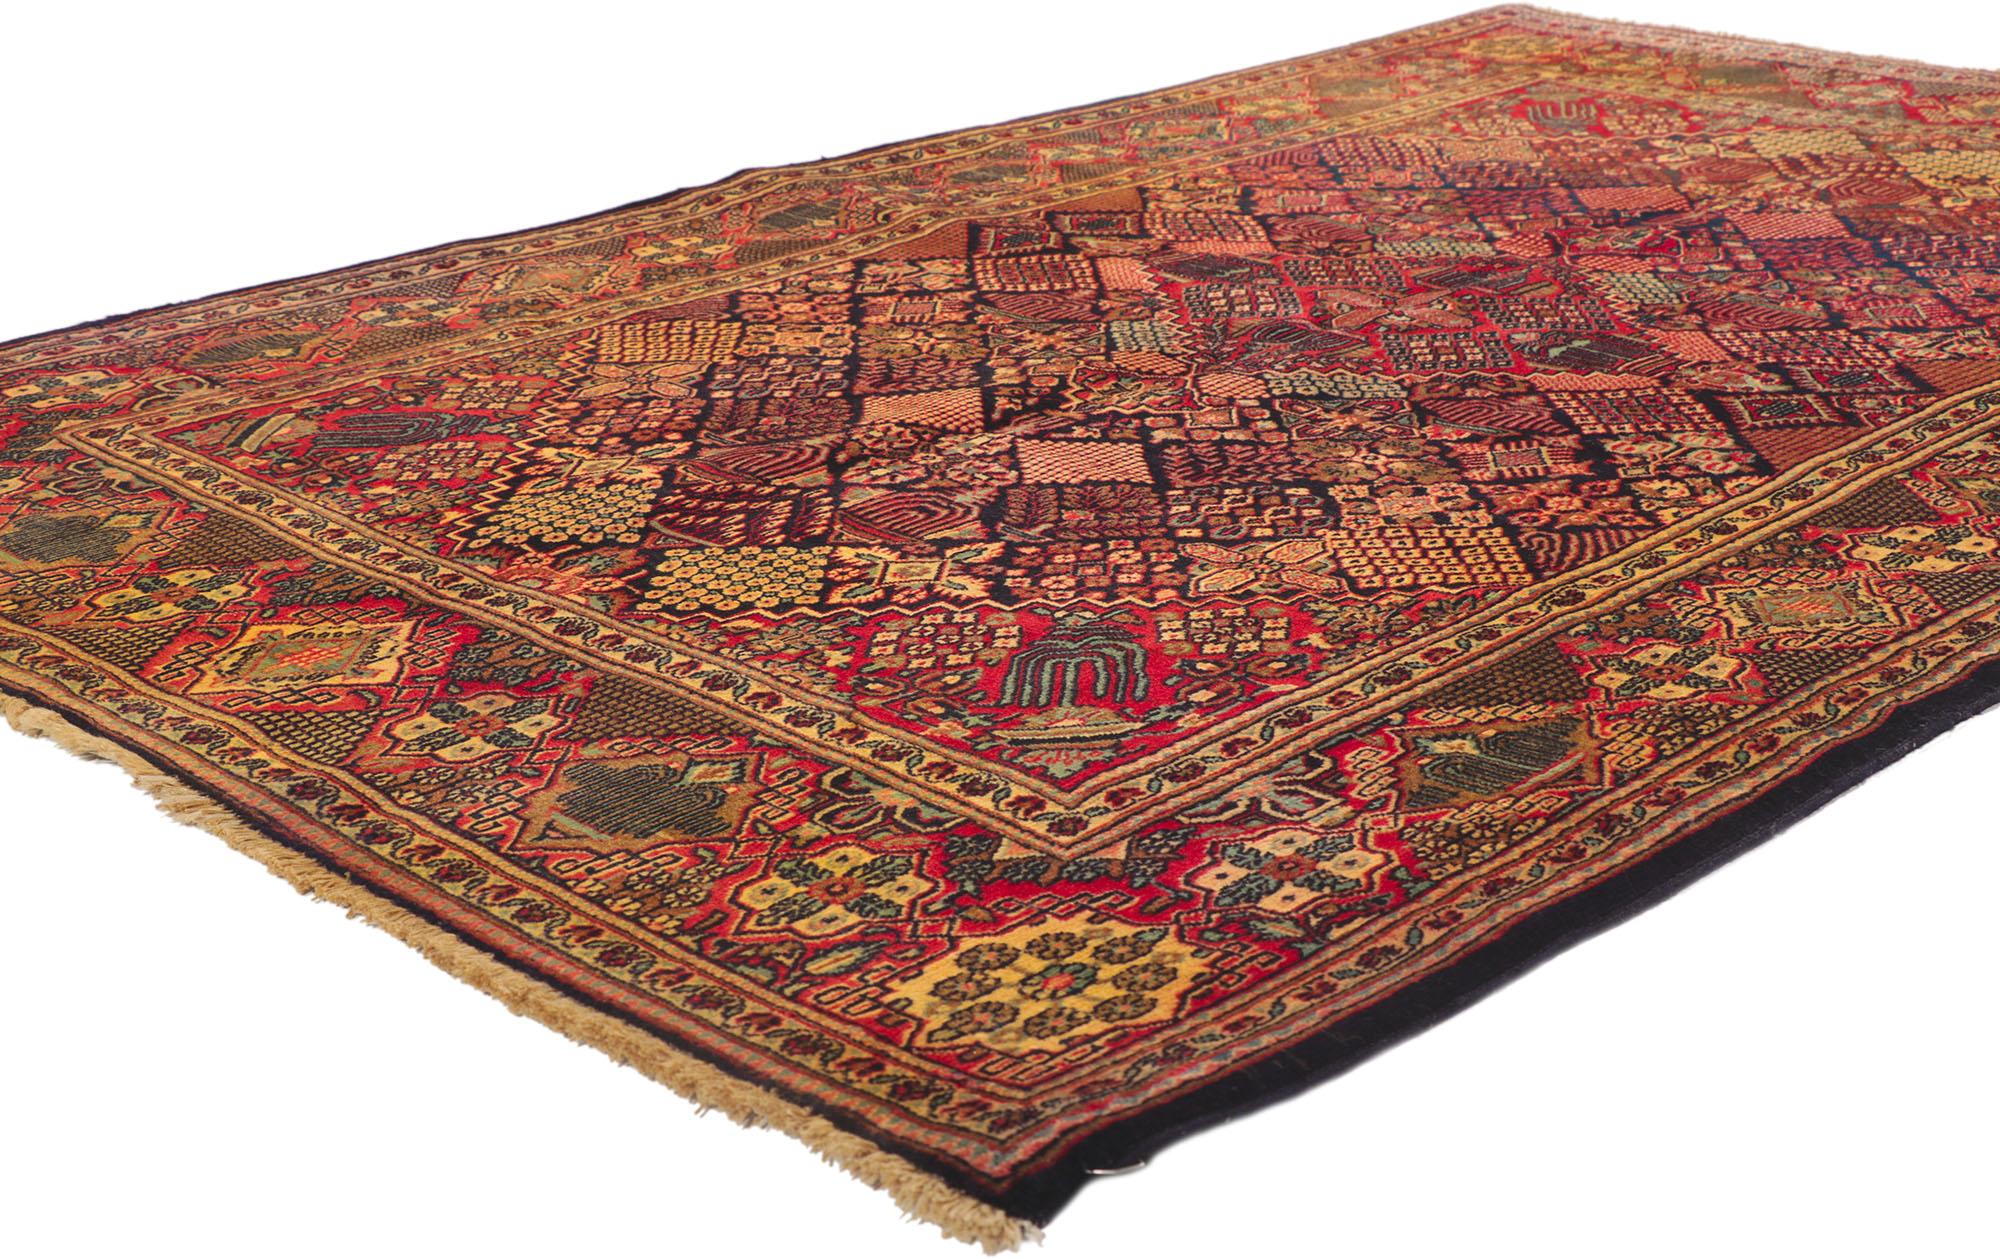 53758 Antique Persian Kashan Rug, 04'05 x 06'08. Persian Kashan rugs, hailing from the historic city of Kashan in Iran, are revered for their impeccable artisanship, intricate patterns, and storied legacy. These exquisite hand-knotted creations